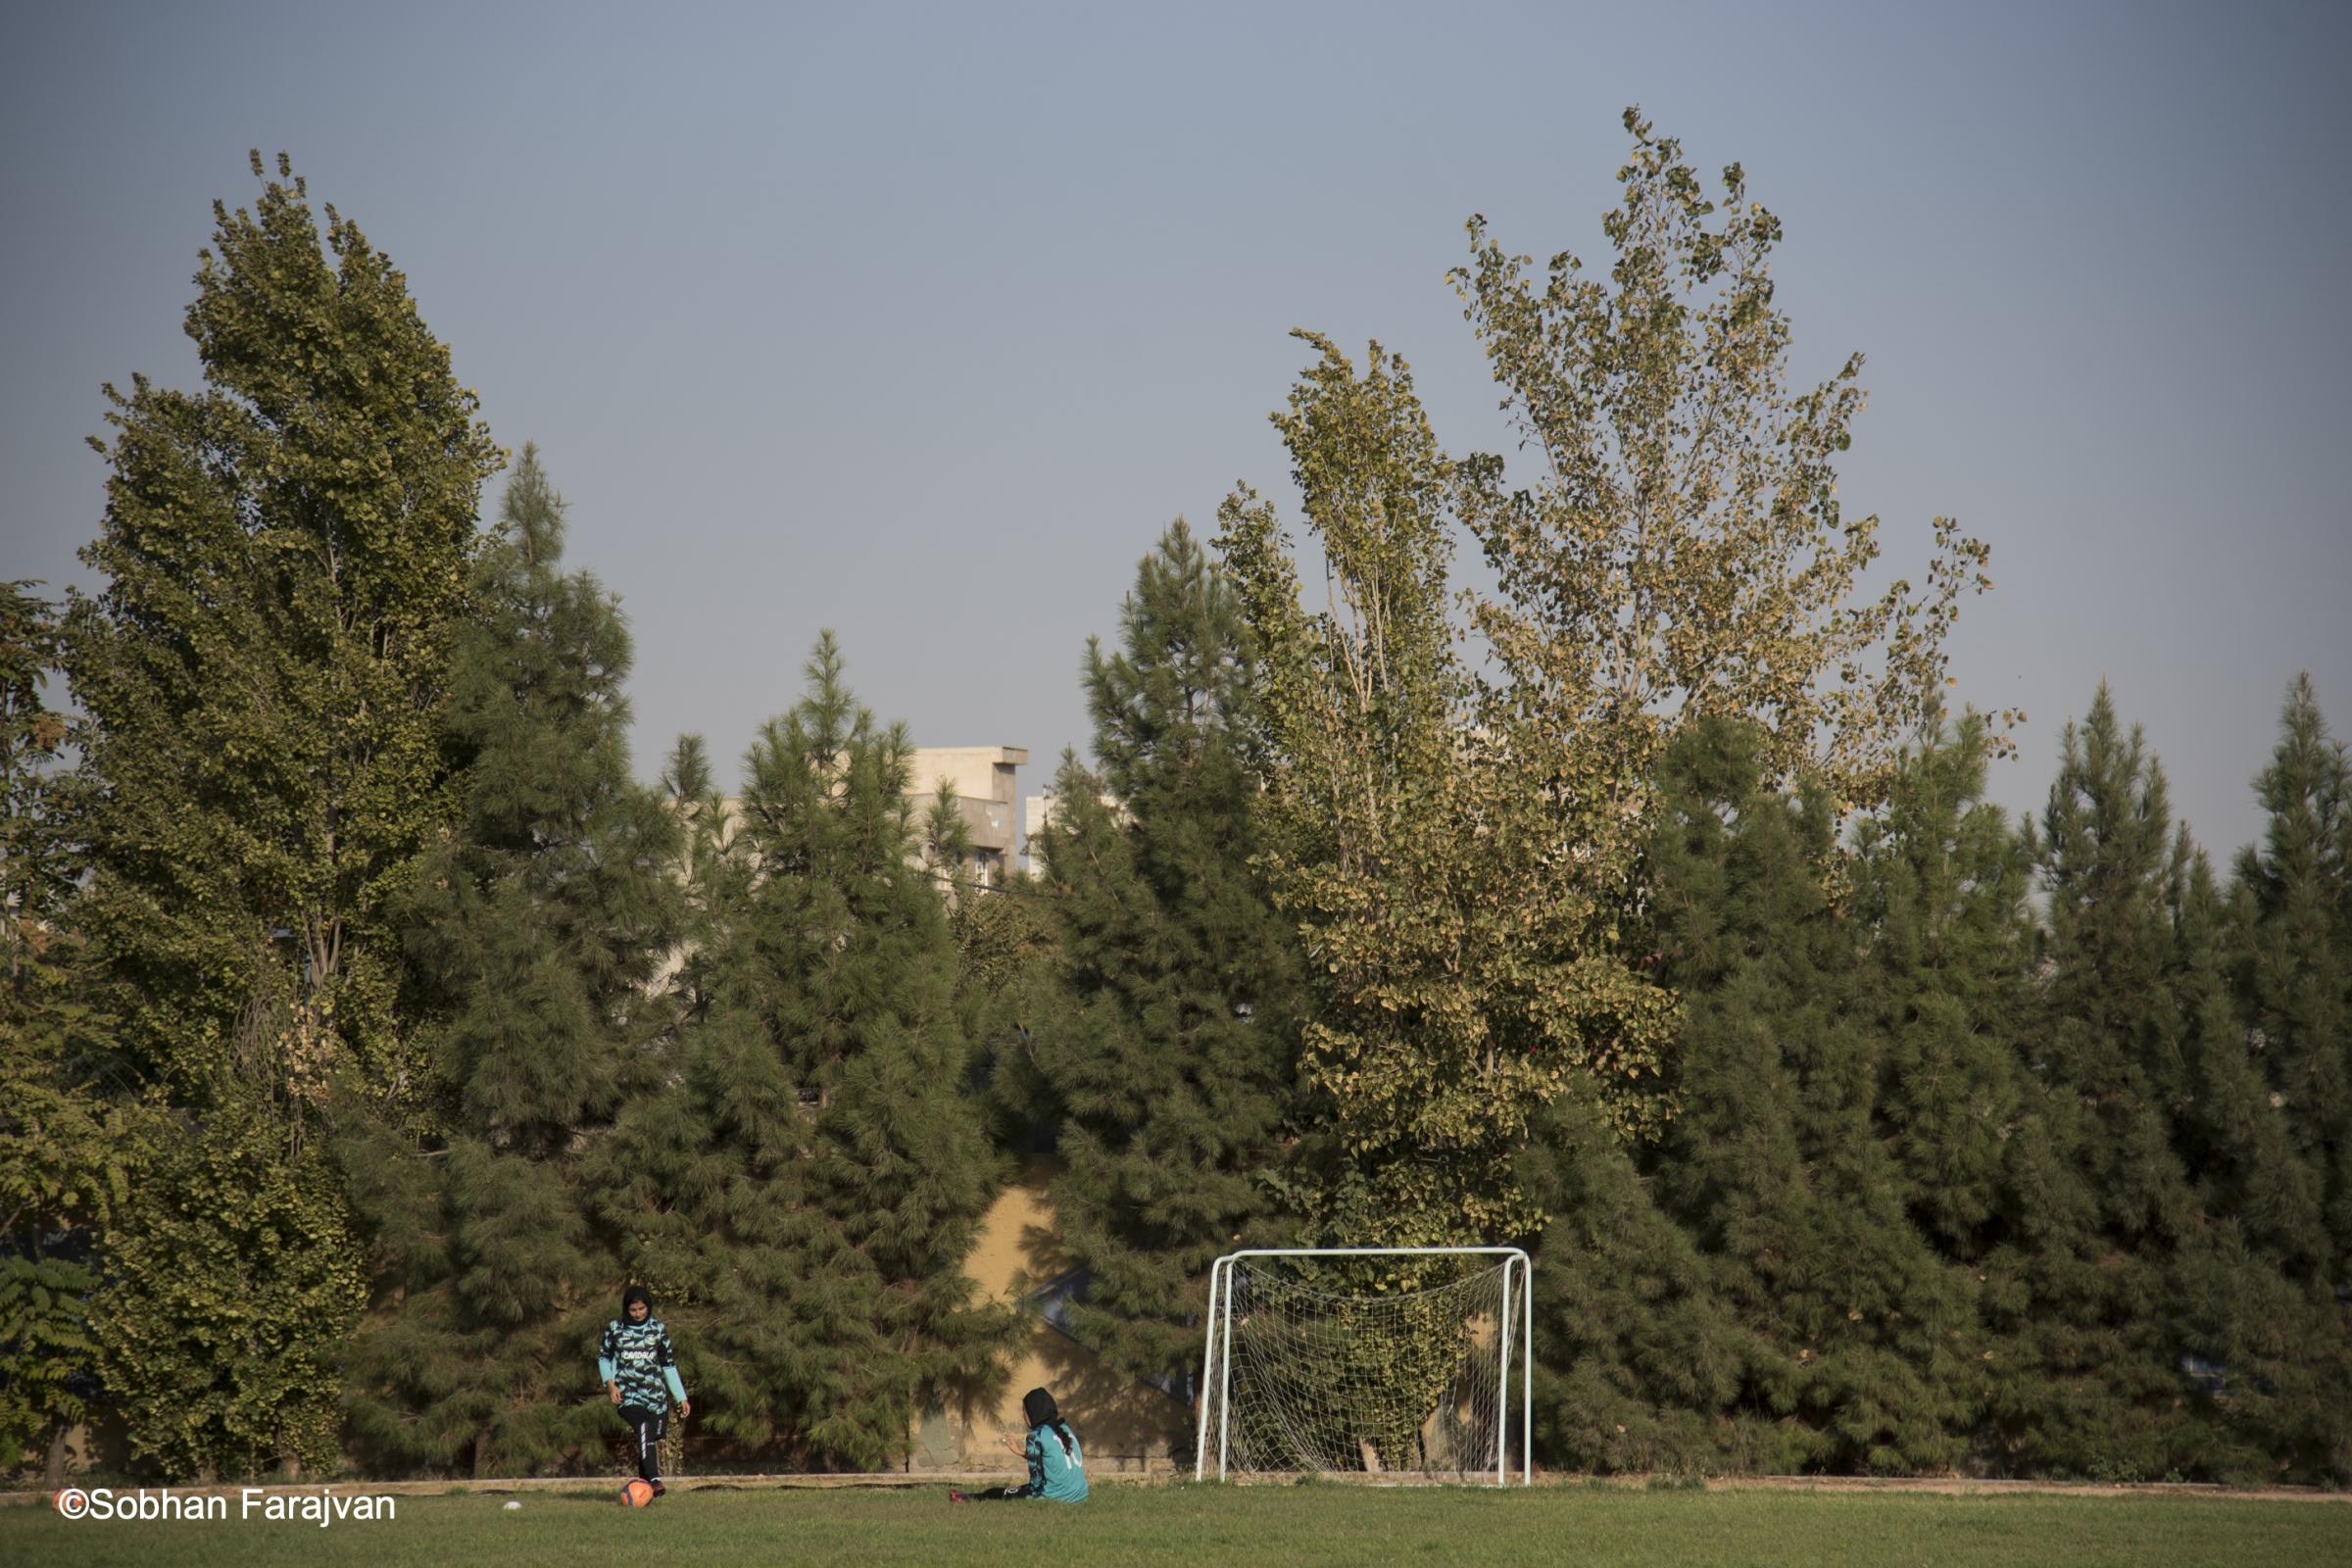 Iranian women's soccer academy (2022) - Iranian girl players are training soccer on the academy...